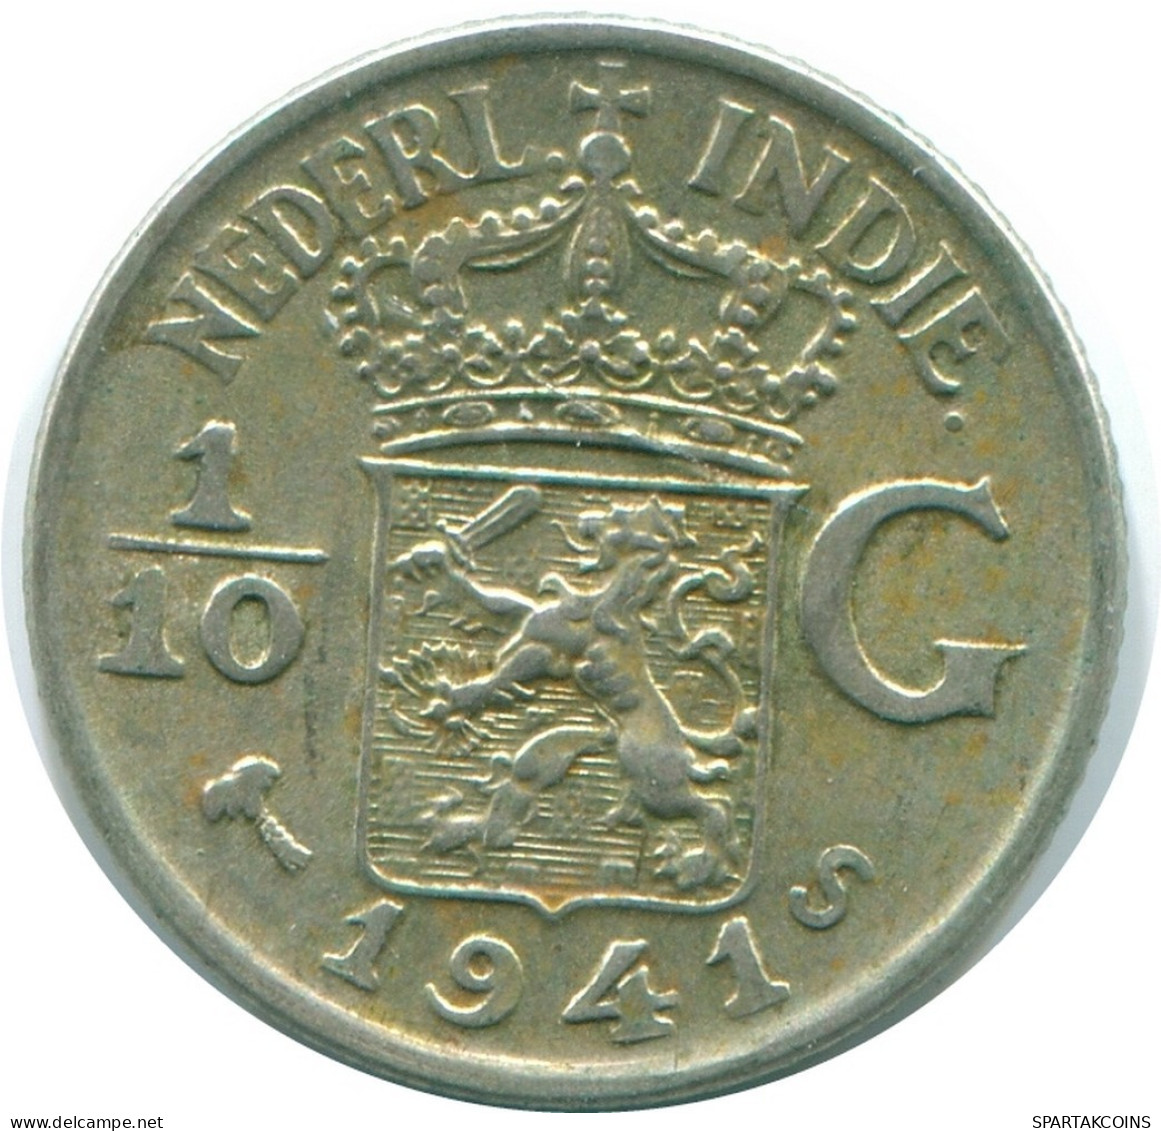 1/10 GULDEN 1941 S NETHERLANDS EAST INDIES SILVER Colonial Coin #NL13682.3.U.A - Indes Neerlandesas